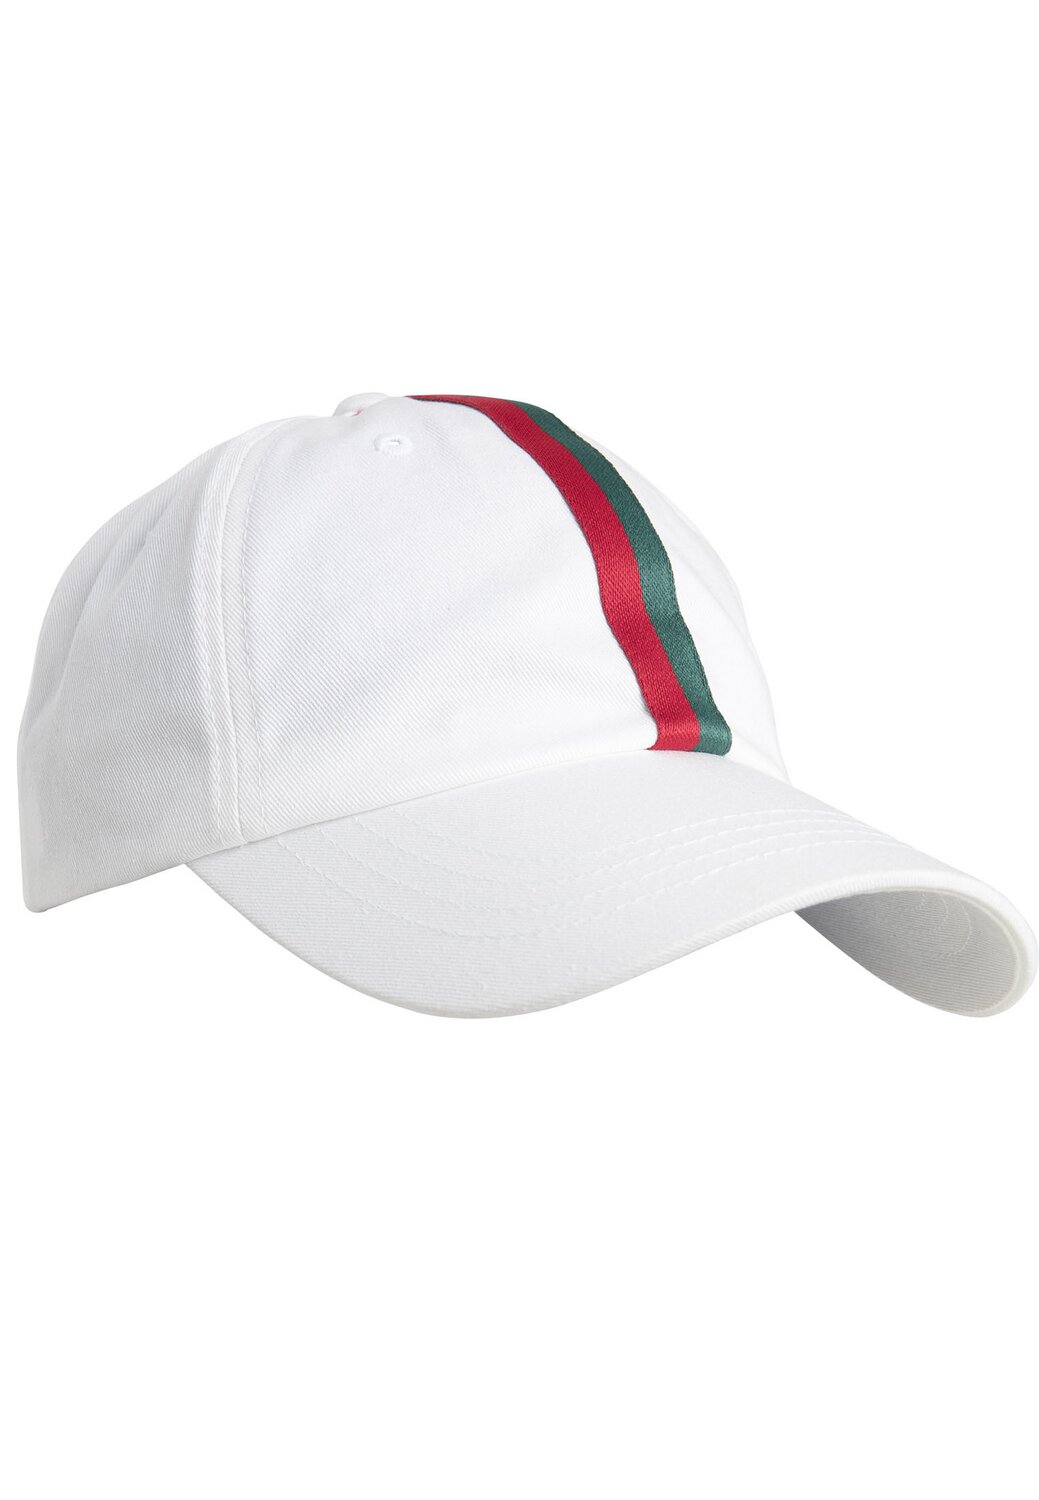 Dad Flexfit | Stripe white/fire MAXISCOOT red/green Hat